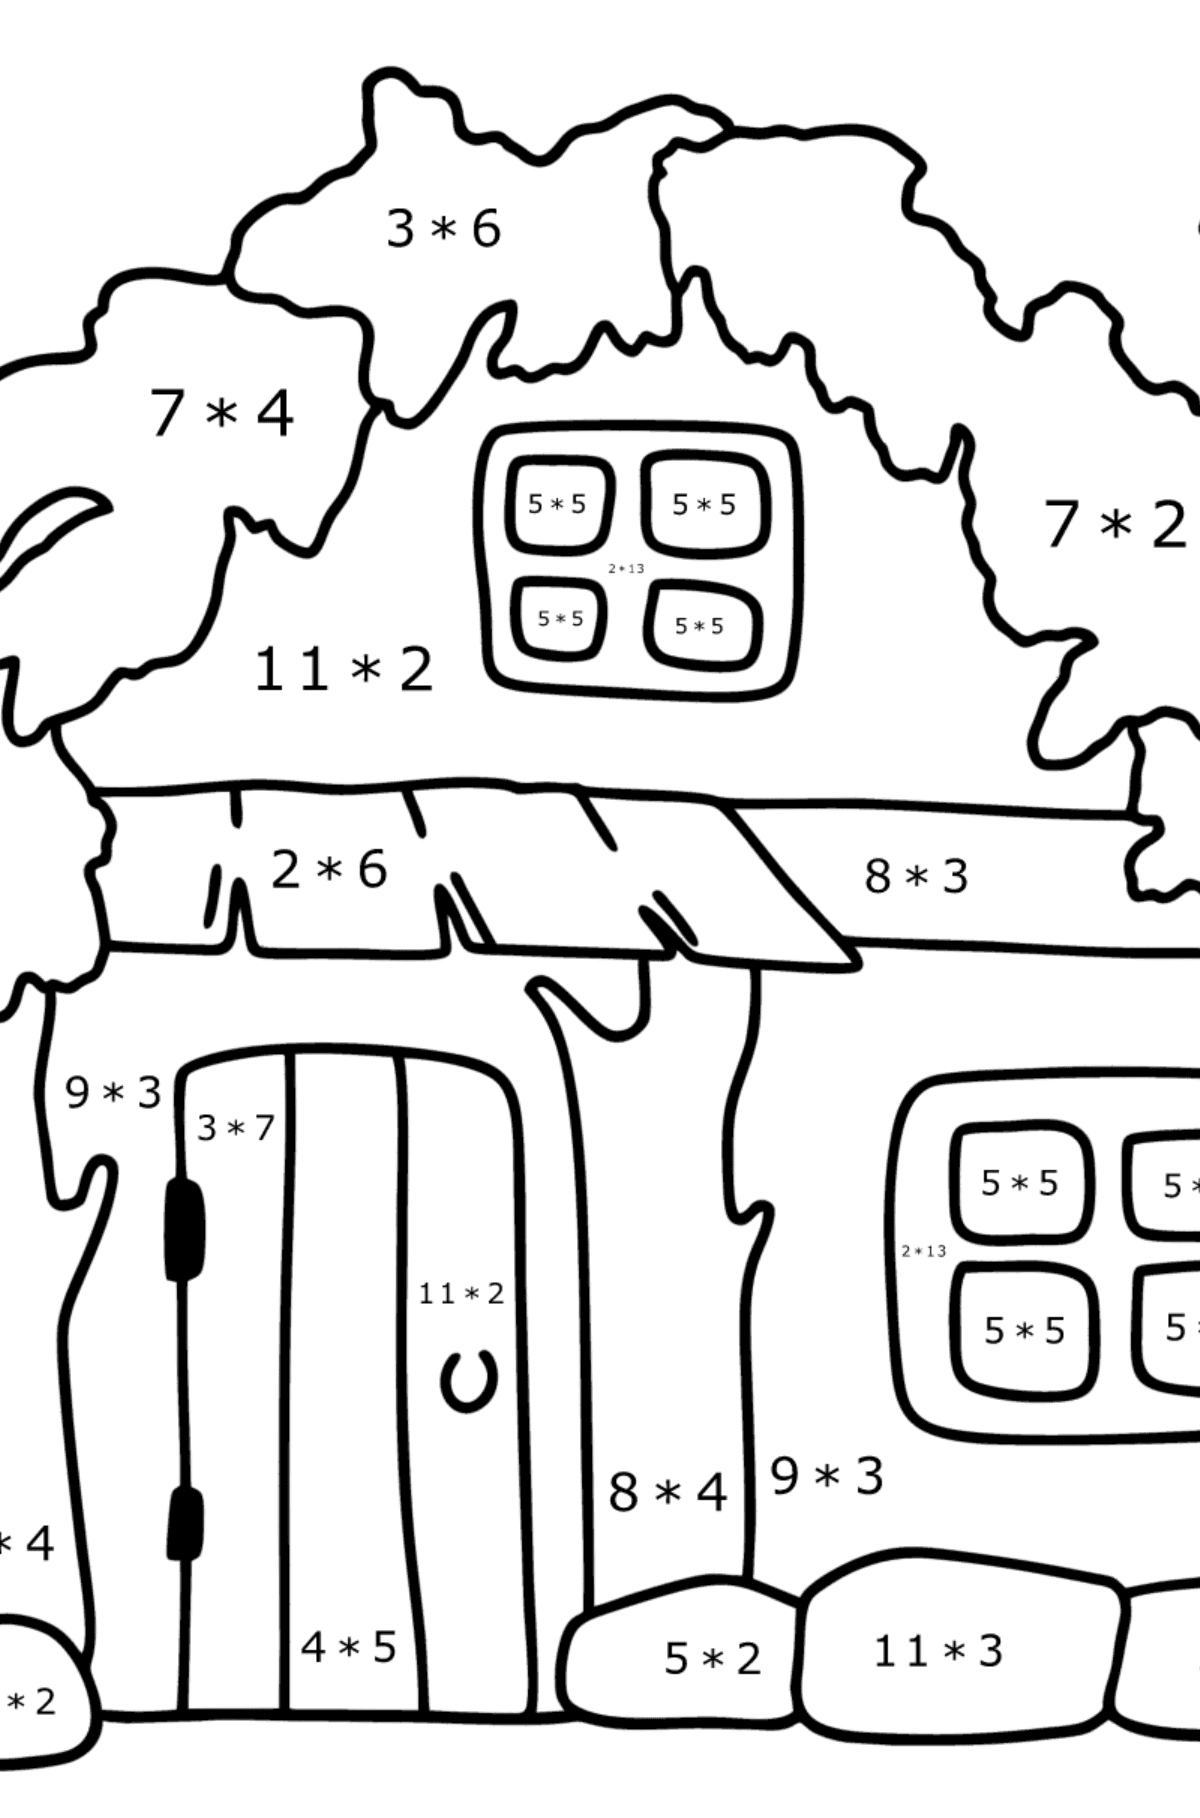 Hut coloring page - Math Coloring - Multiplication for Kids